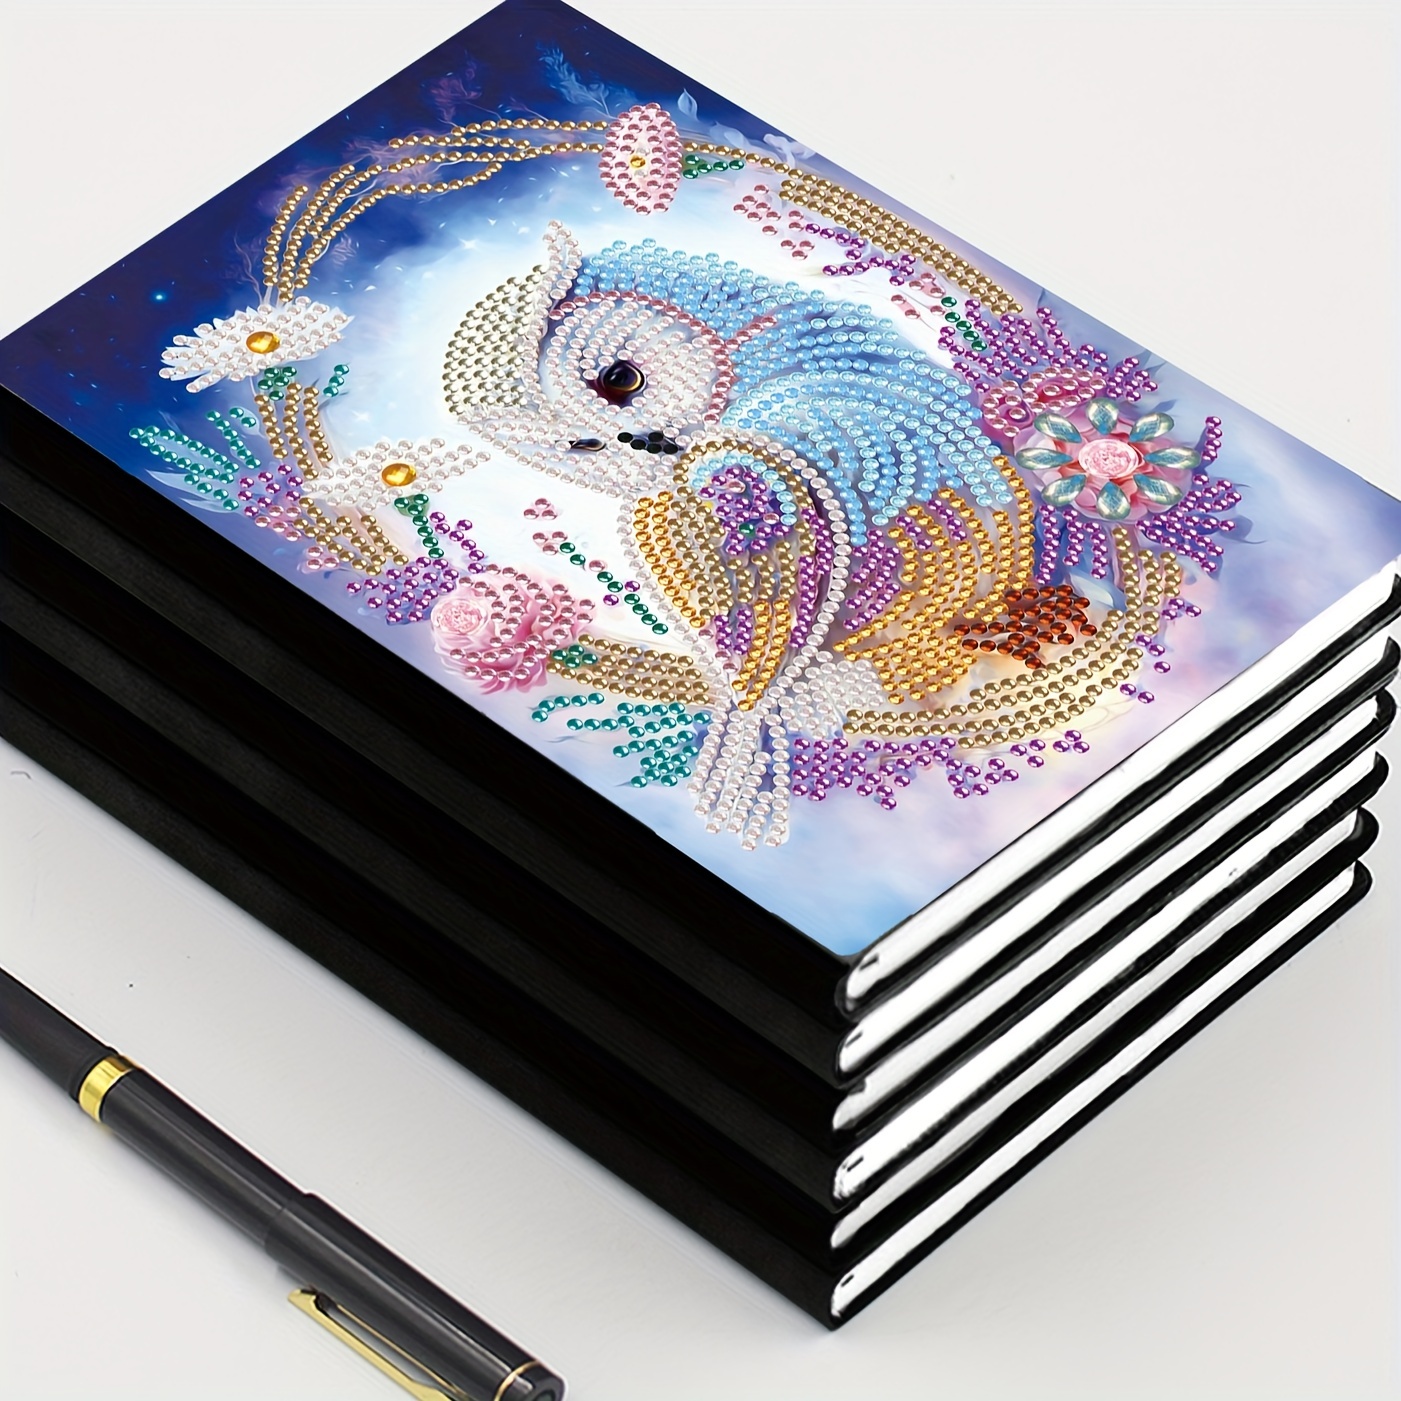 Diamond Painting Logbook For Her: Organizer Notebook Journal to Track DP  Art Projects by Diamond Painting 911